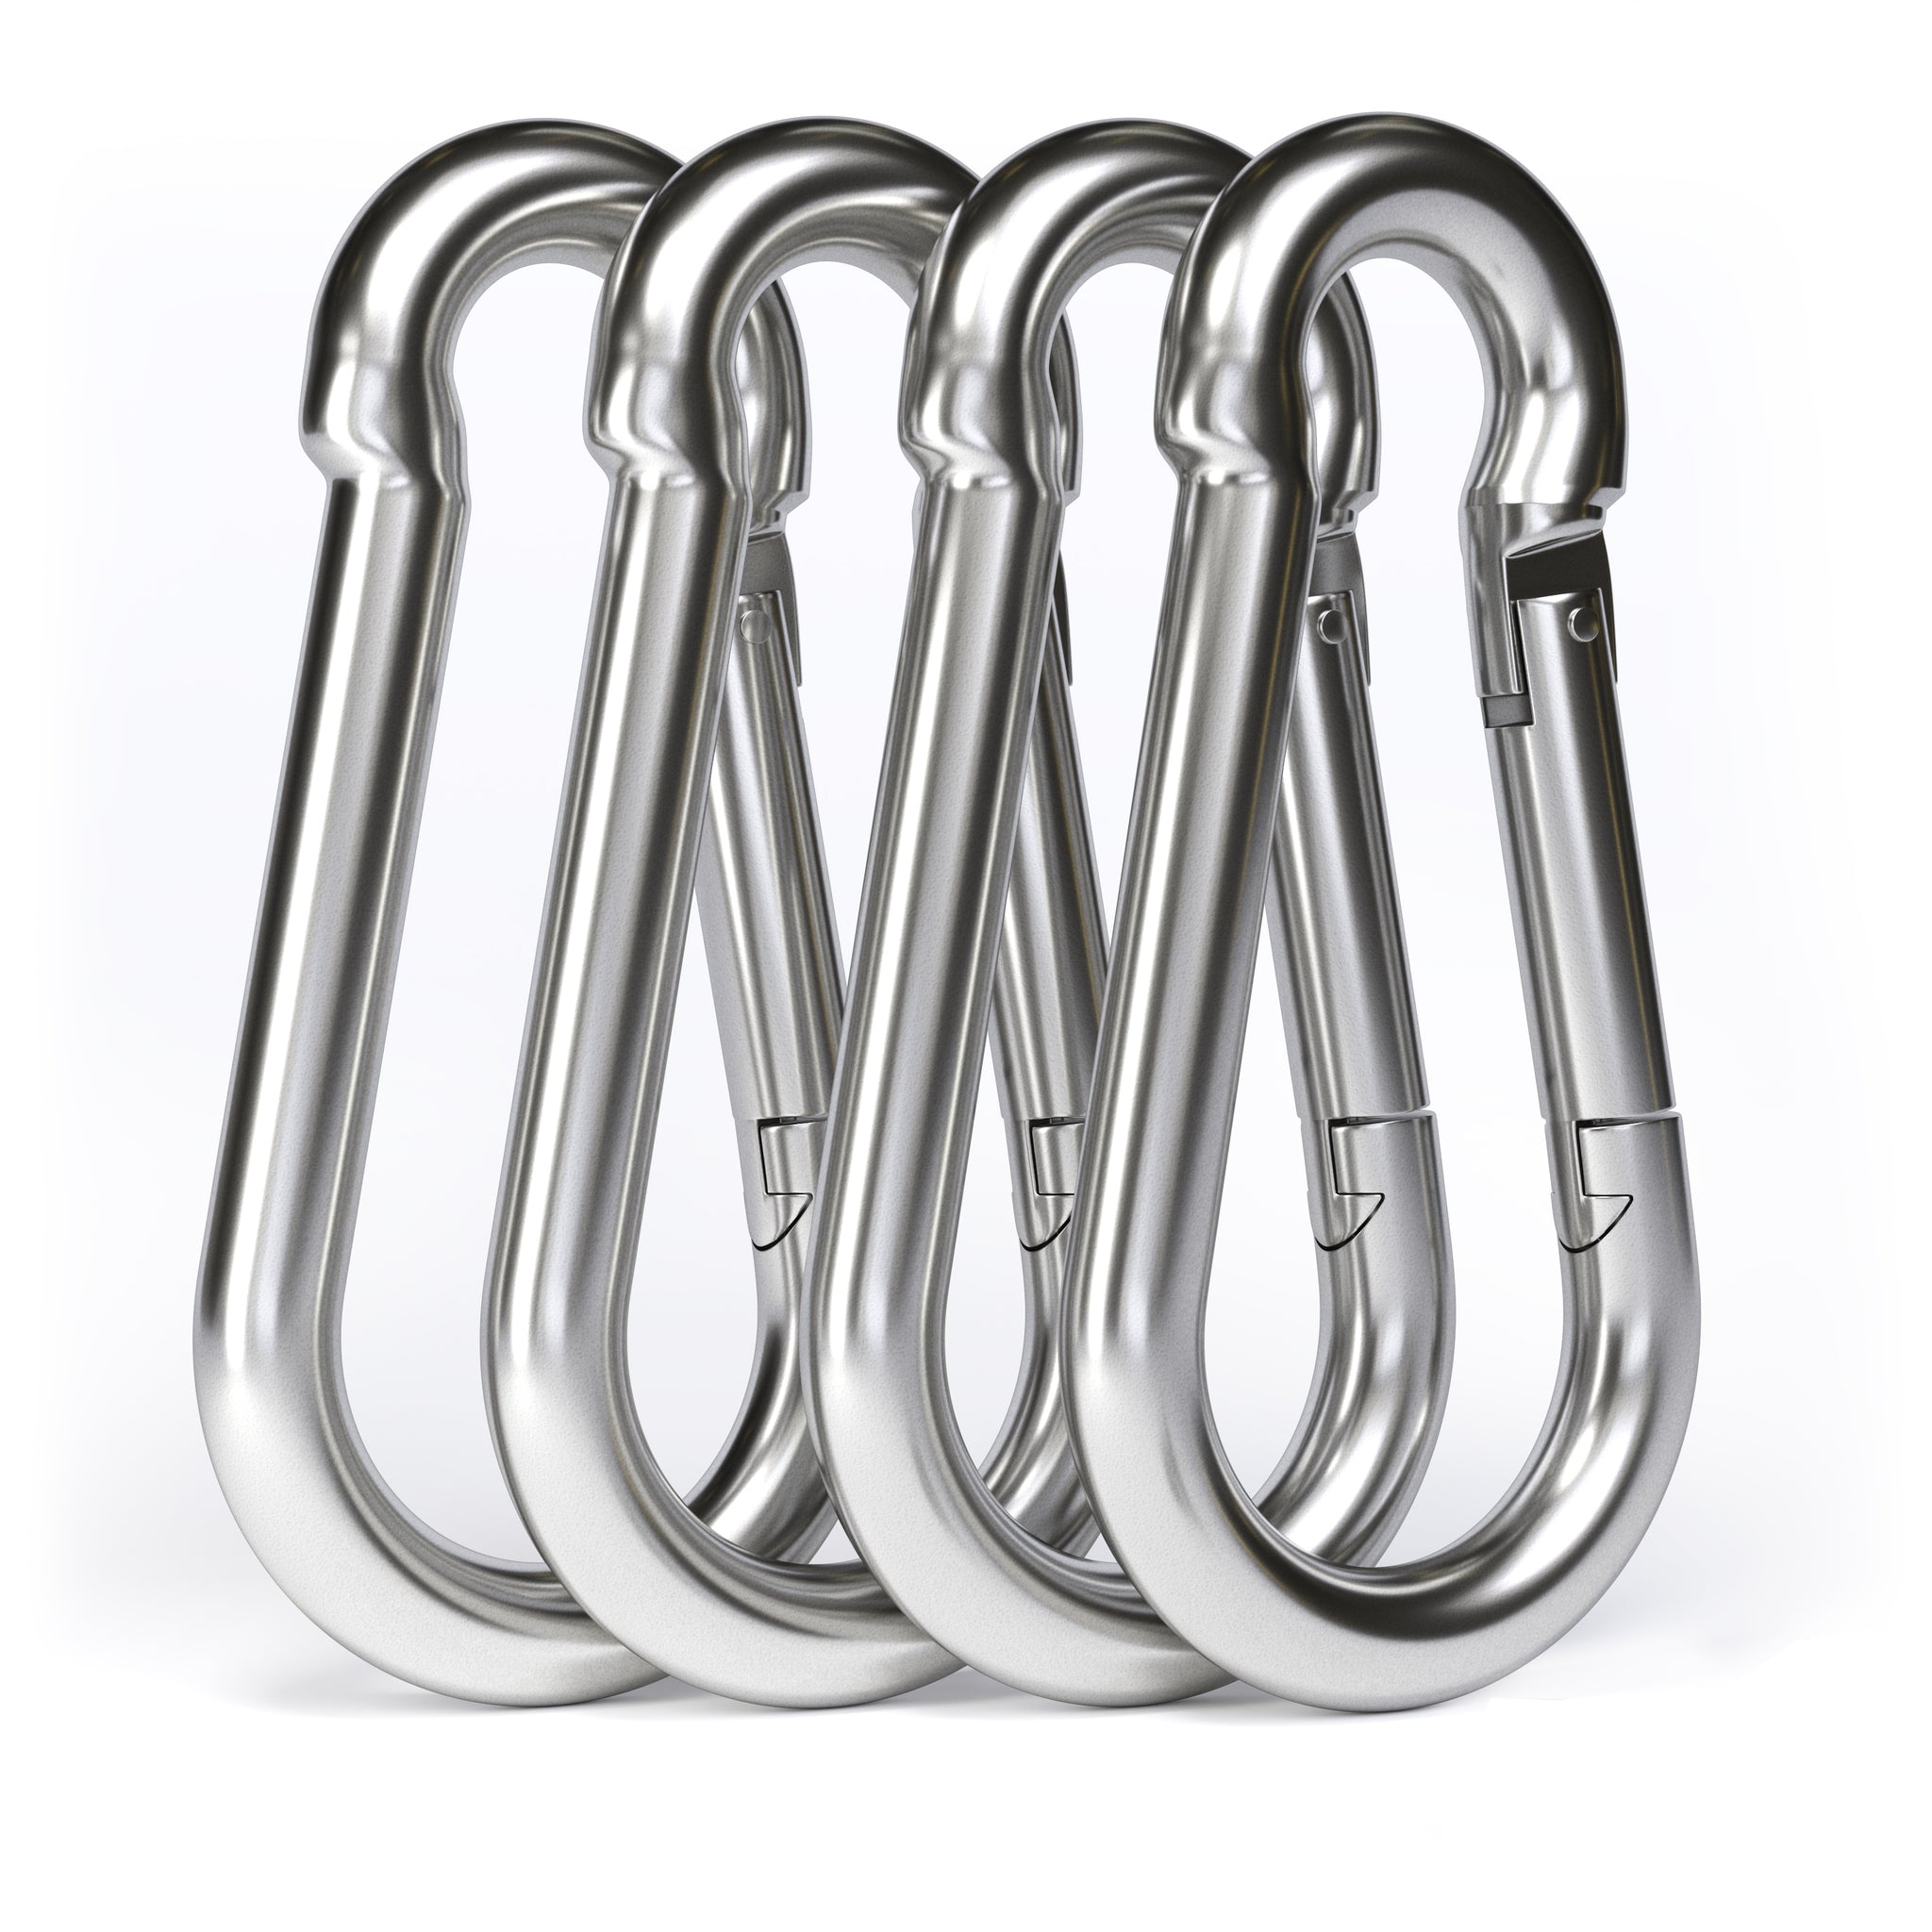 dimok Heavy Duty Carabiner Clips Stainless Steel Spring Snap Hook